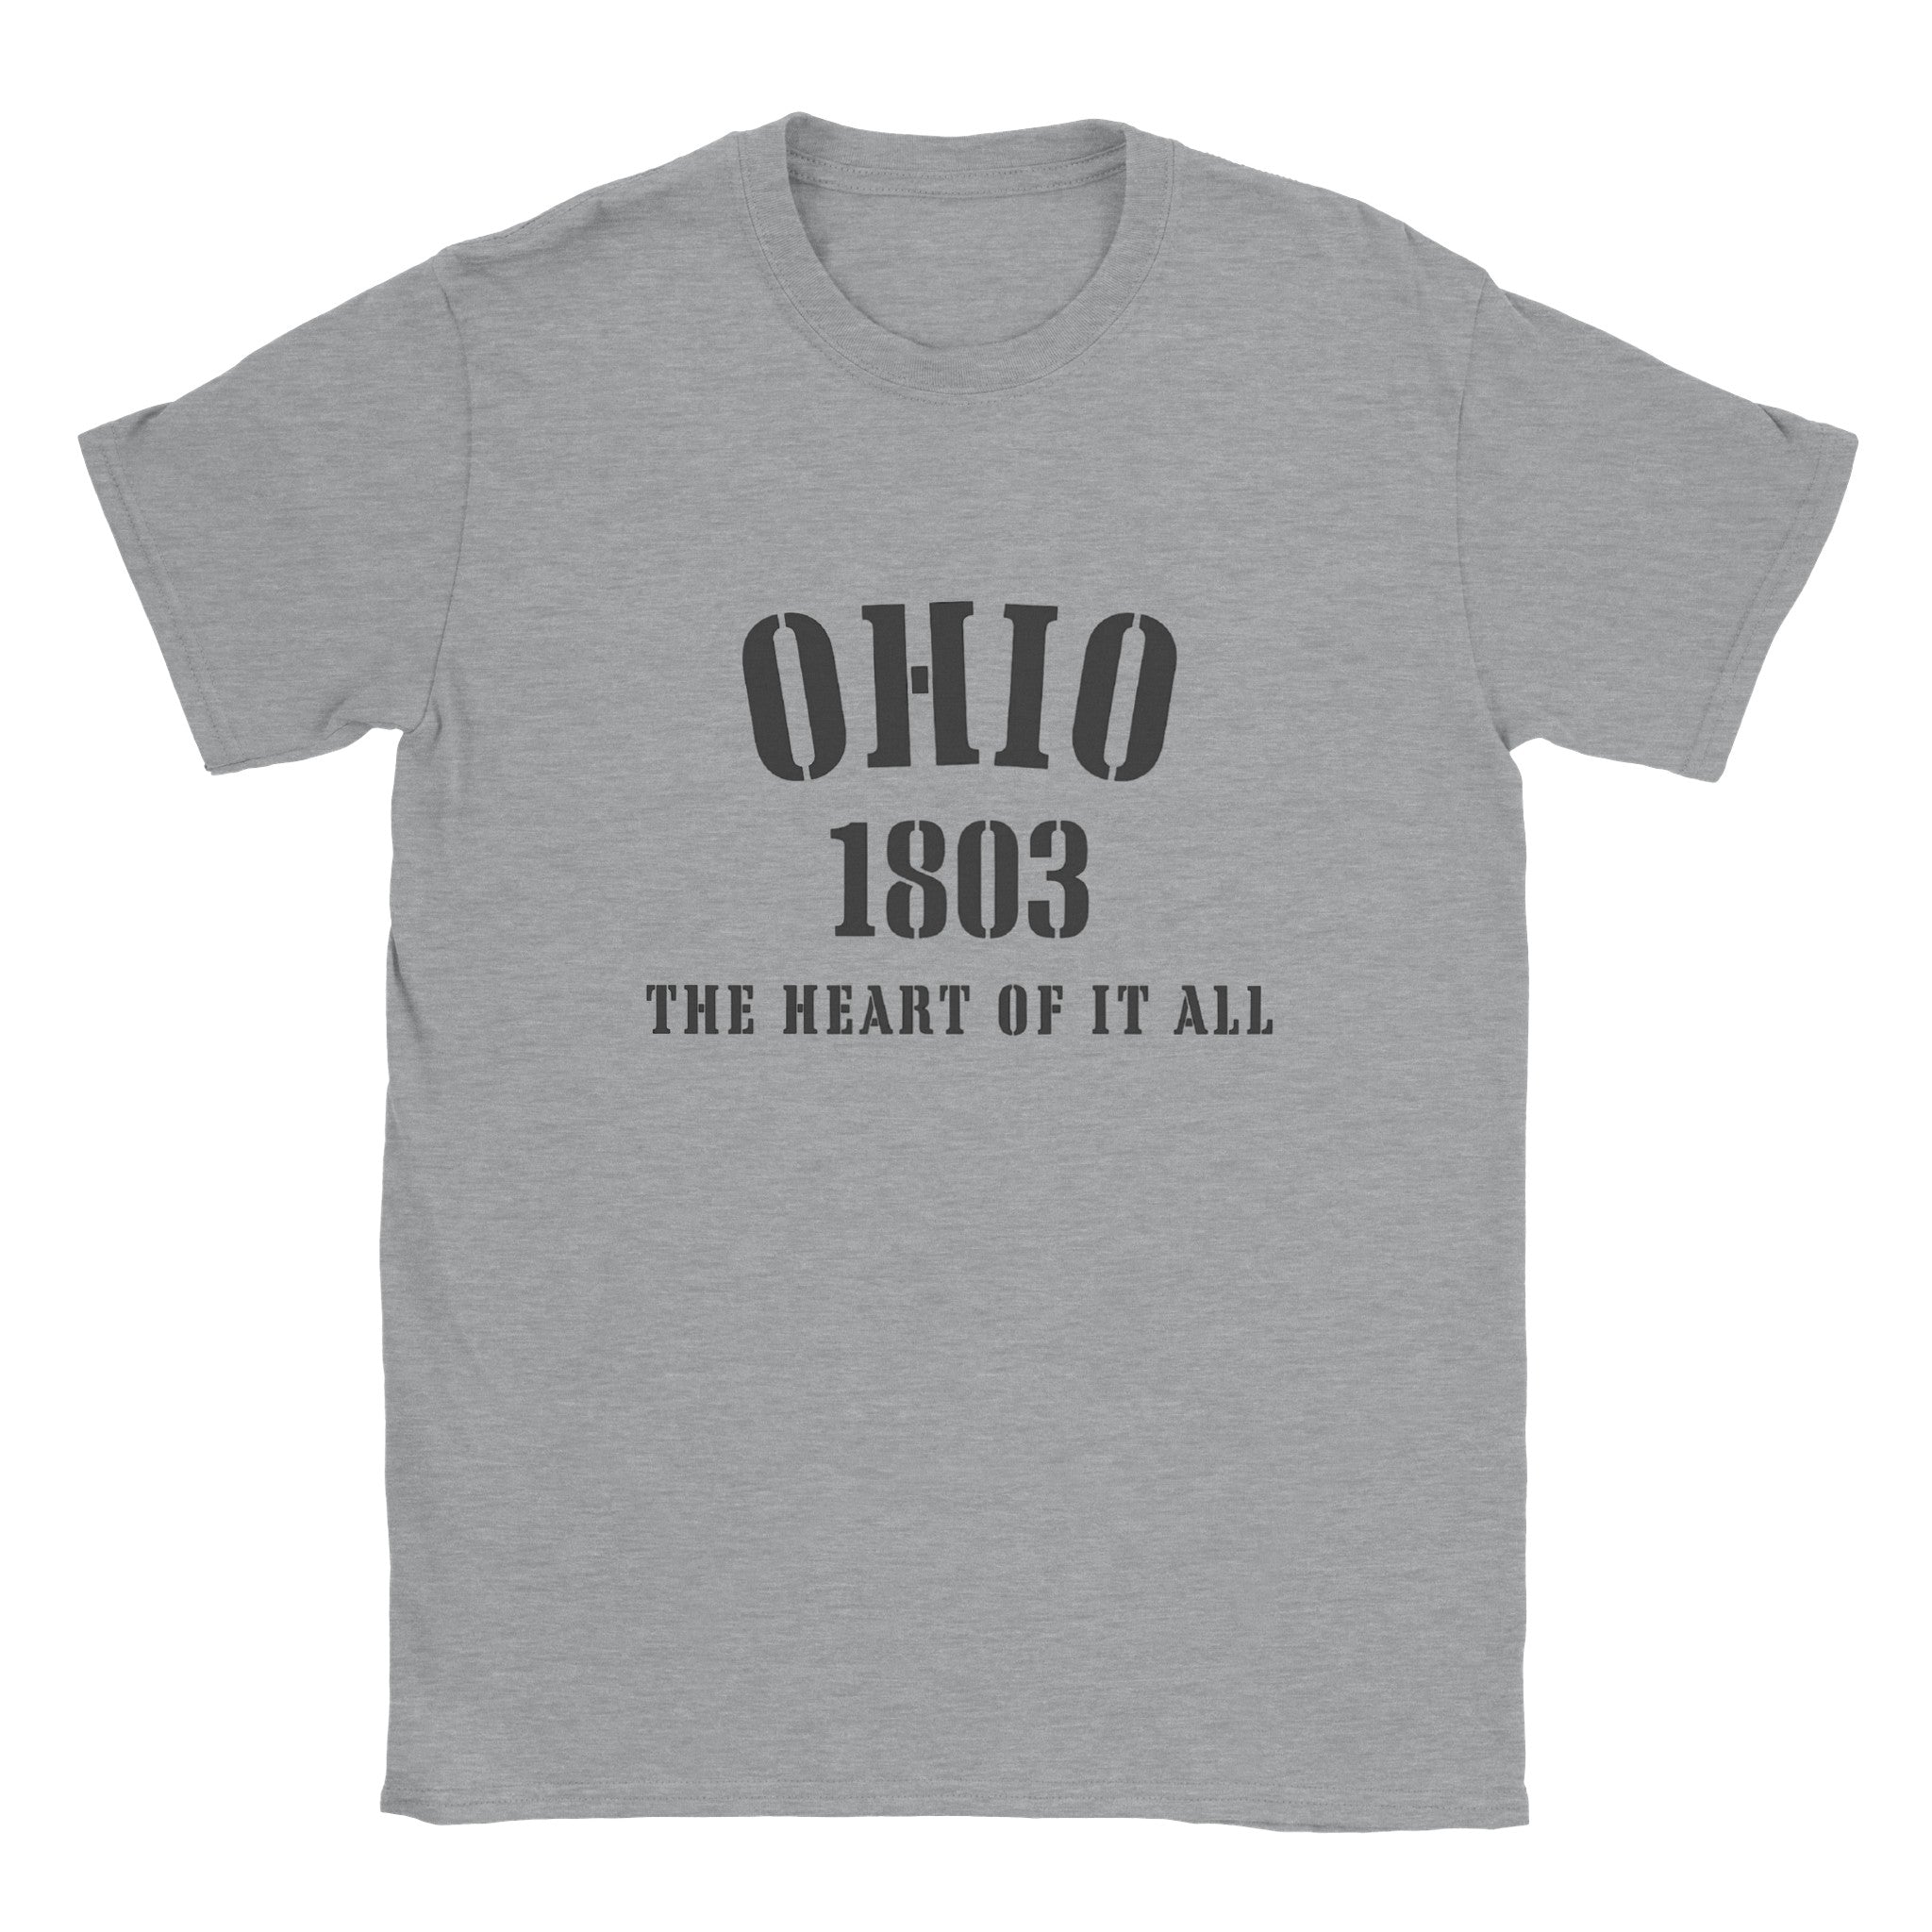 Ohio- Classic Unisex Crewneck States T-shirt - Creations by Chris and Carlos